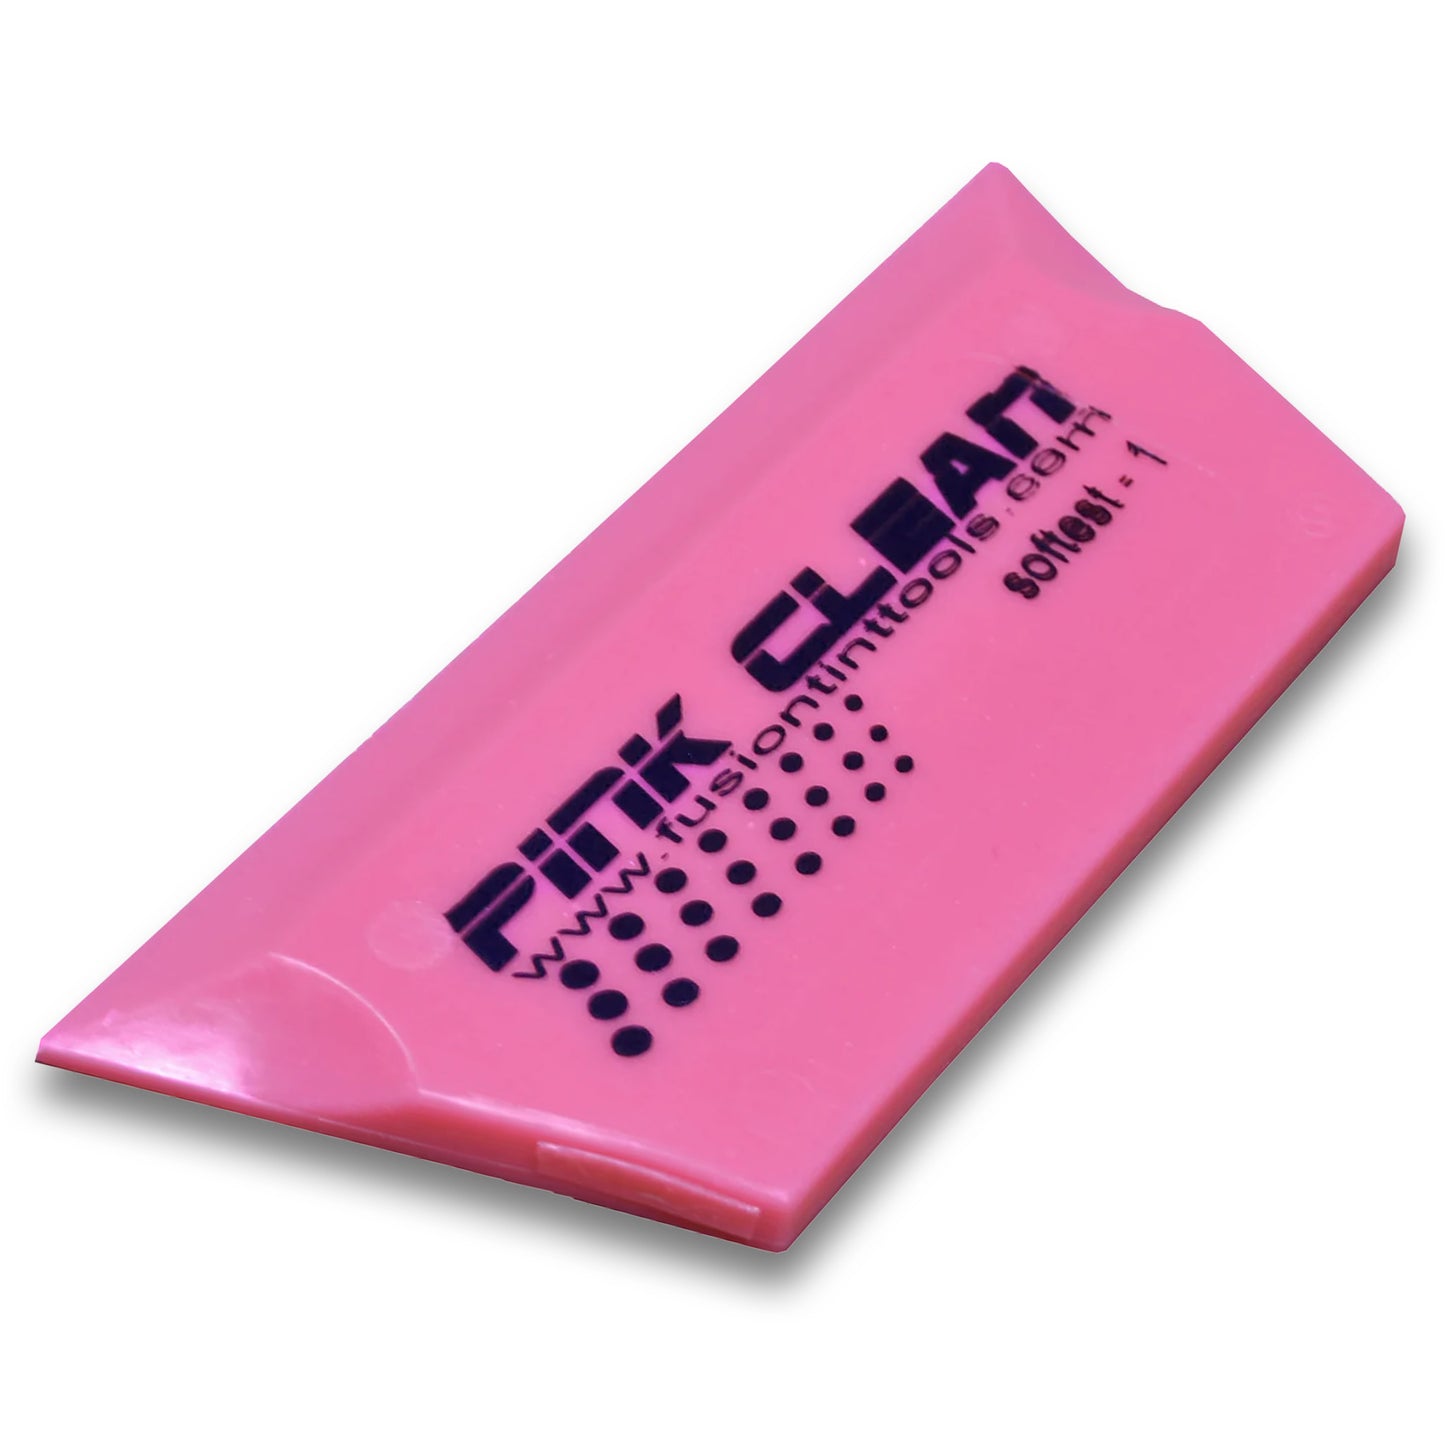 5” Pink Clean Cropped Squeegee Blade